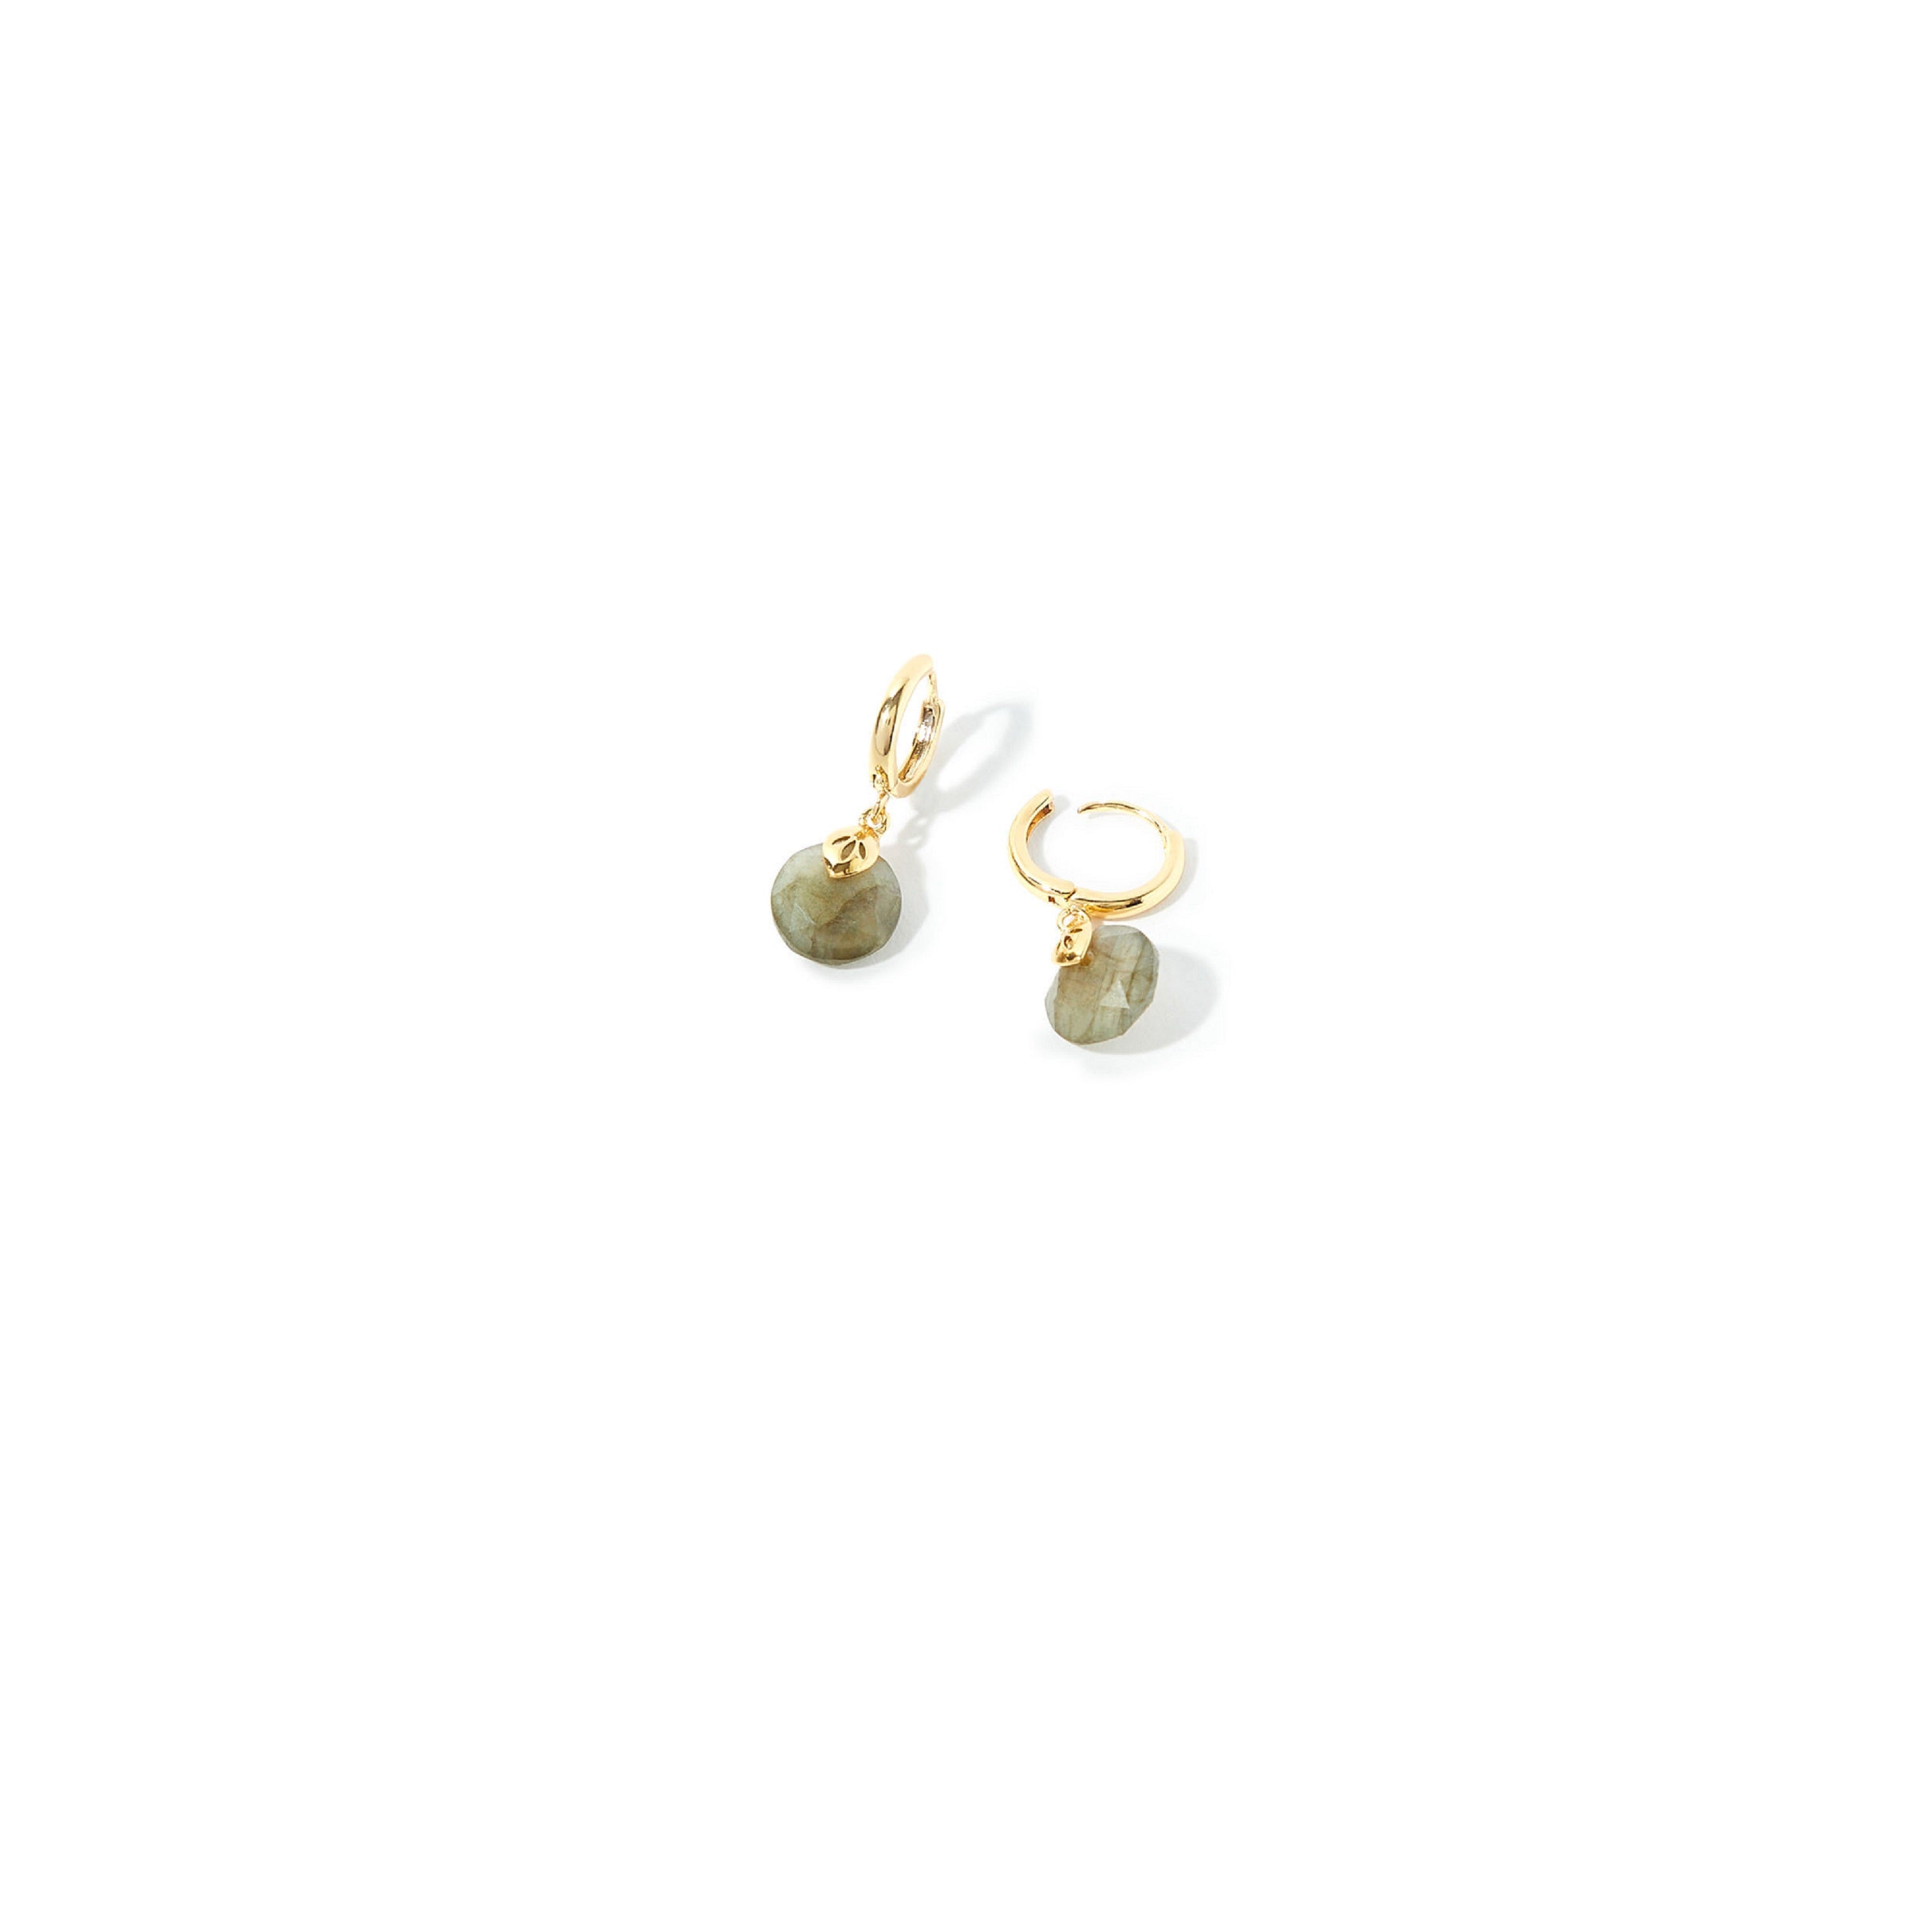 Real Gold Plated Circle Healing Stone Hoops Earring Laboradite For Women By Accessorize London